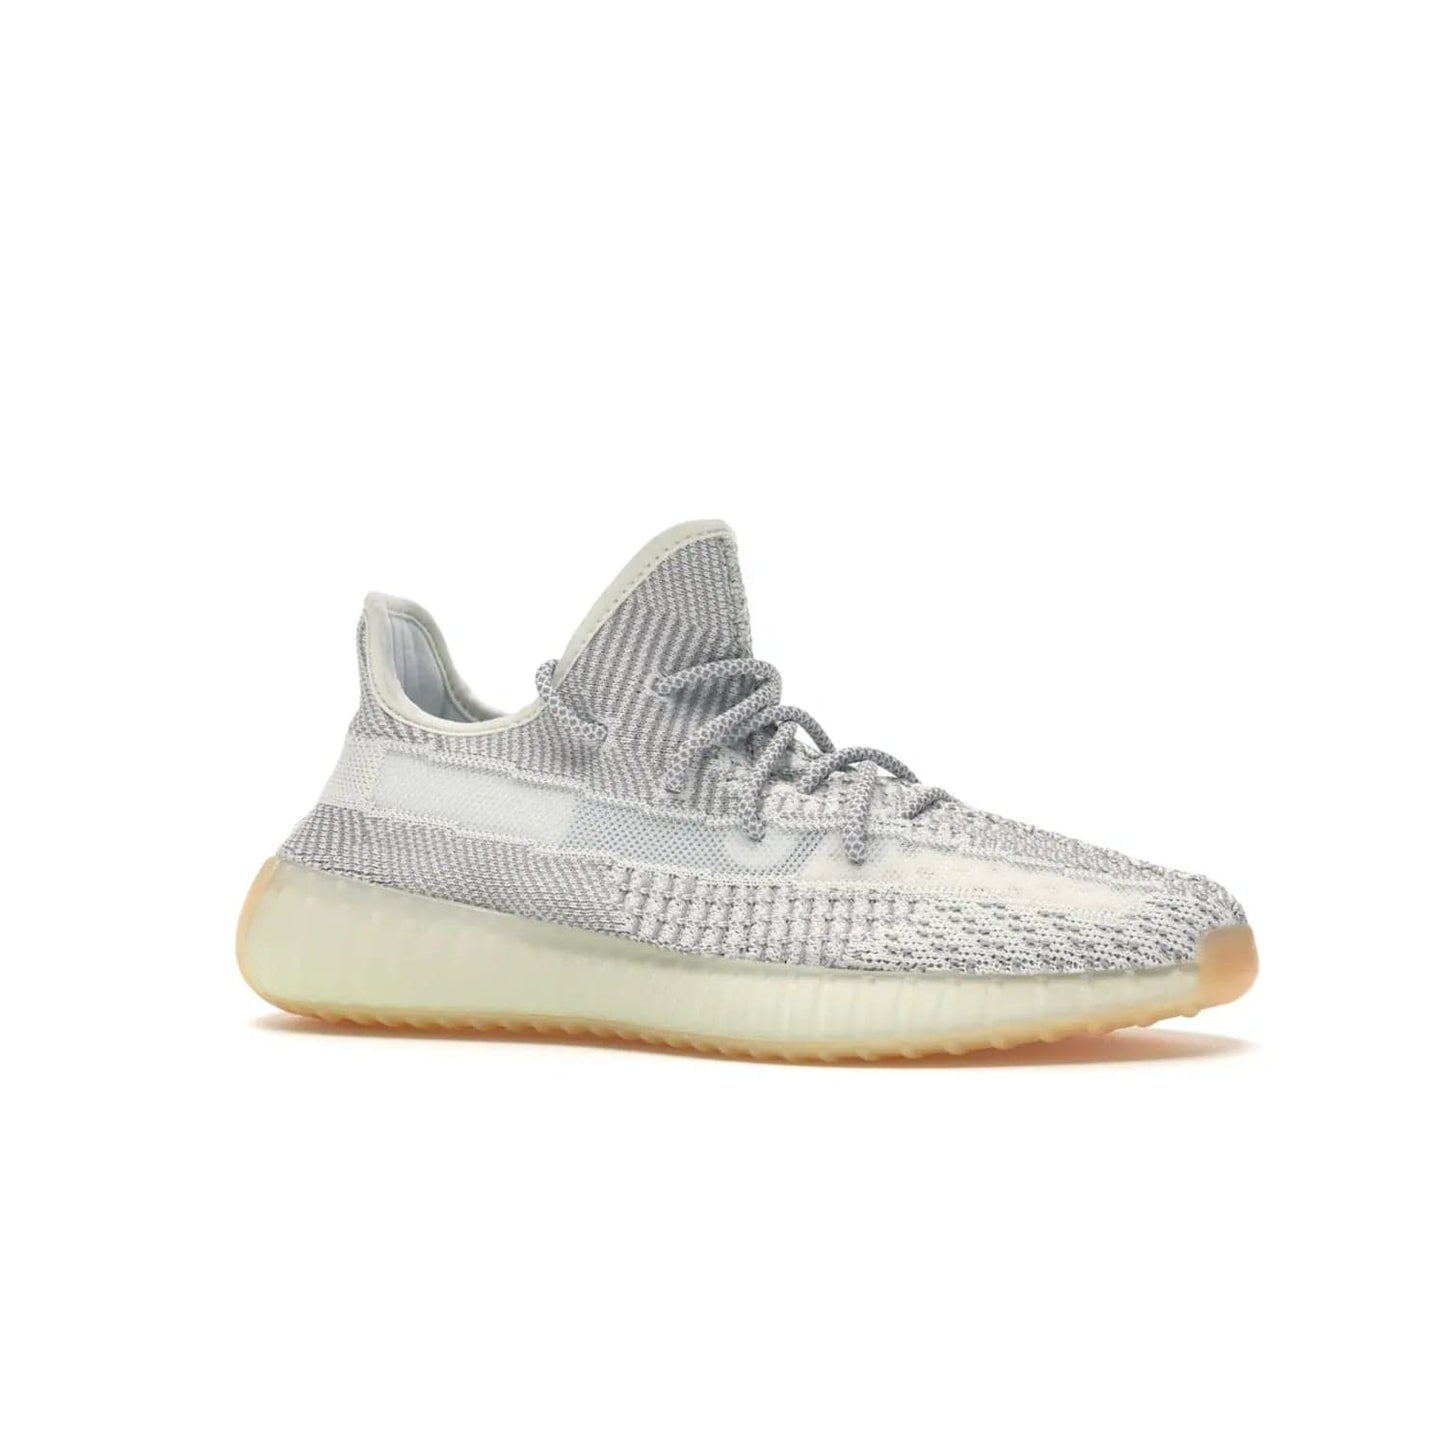 adidas Yeezy Boost 350 V2 Yeshaya (Non-Reflective) - Image 3 - Only at www.BallersClubKickz.com - Step out in style with the adidas Yeezy Boost 350 V2 Yeshaya (Non-Reflective). Gray-and-white Primeknit upper with mesh side stripe & rope laces, plus a translucent Boost sole with a hint of yellow. Make a statement and feel comfortable with this stylish sneaker.